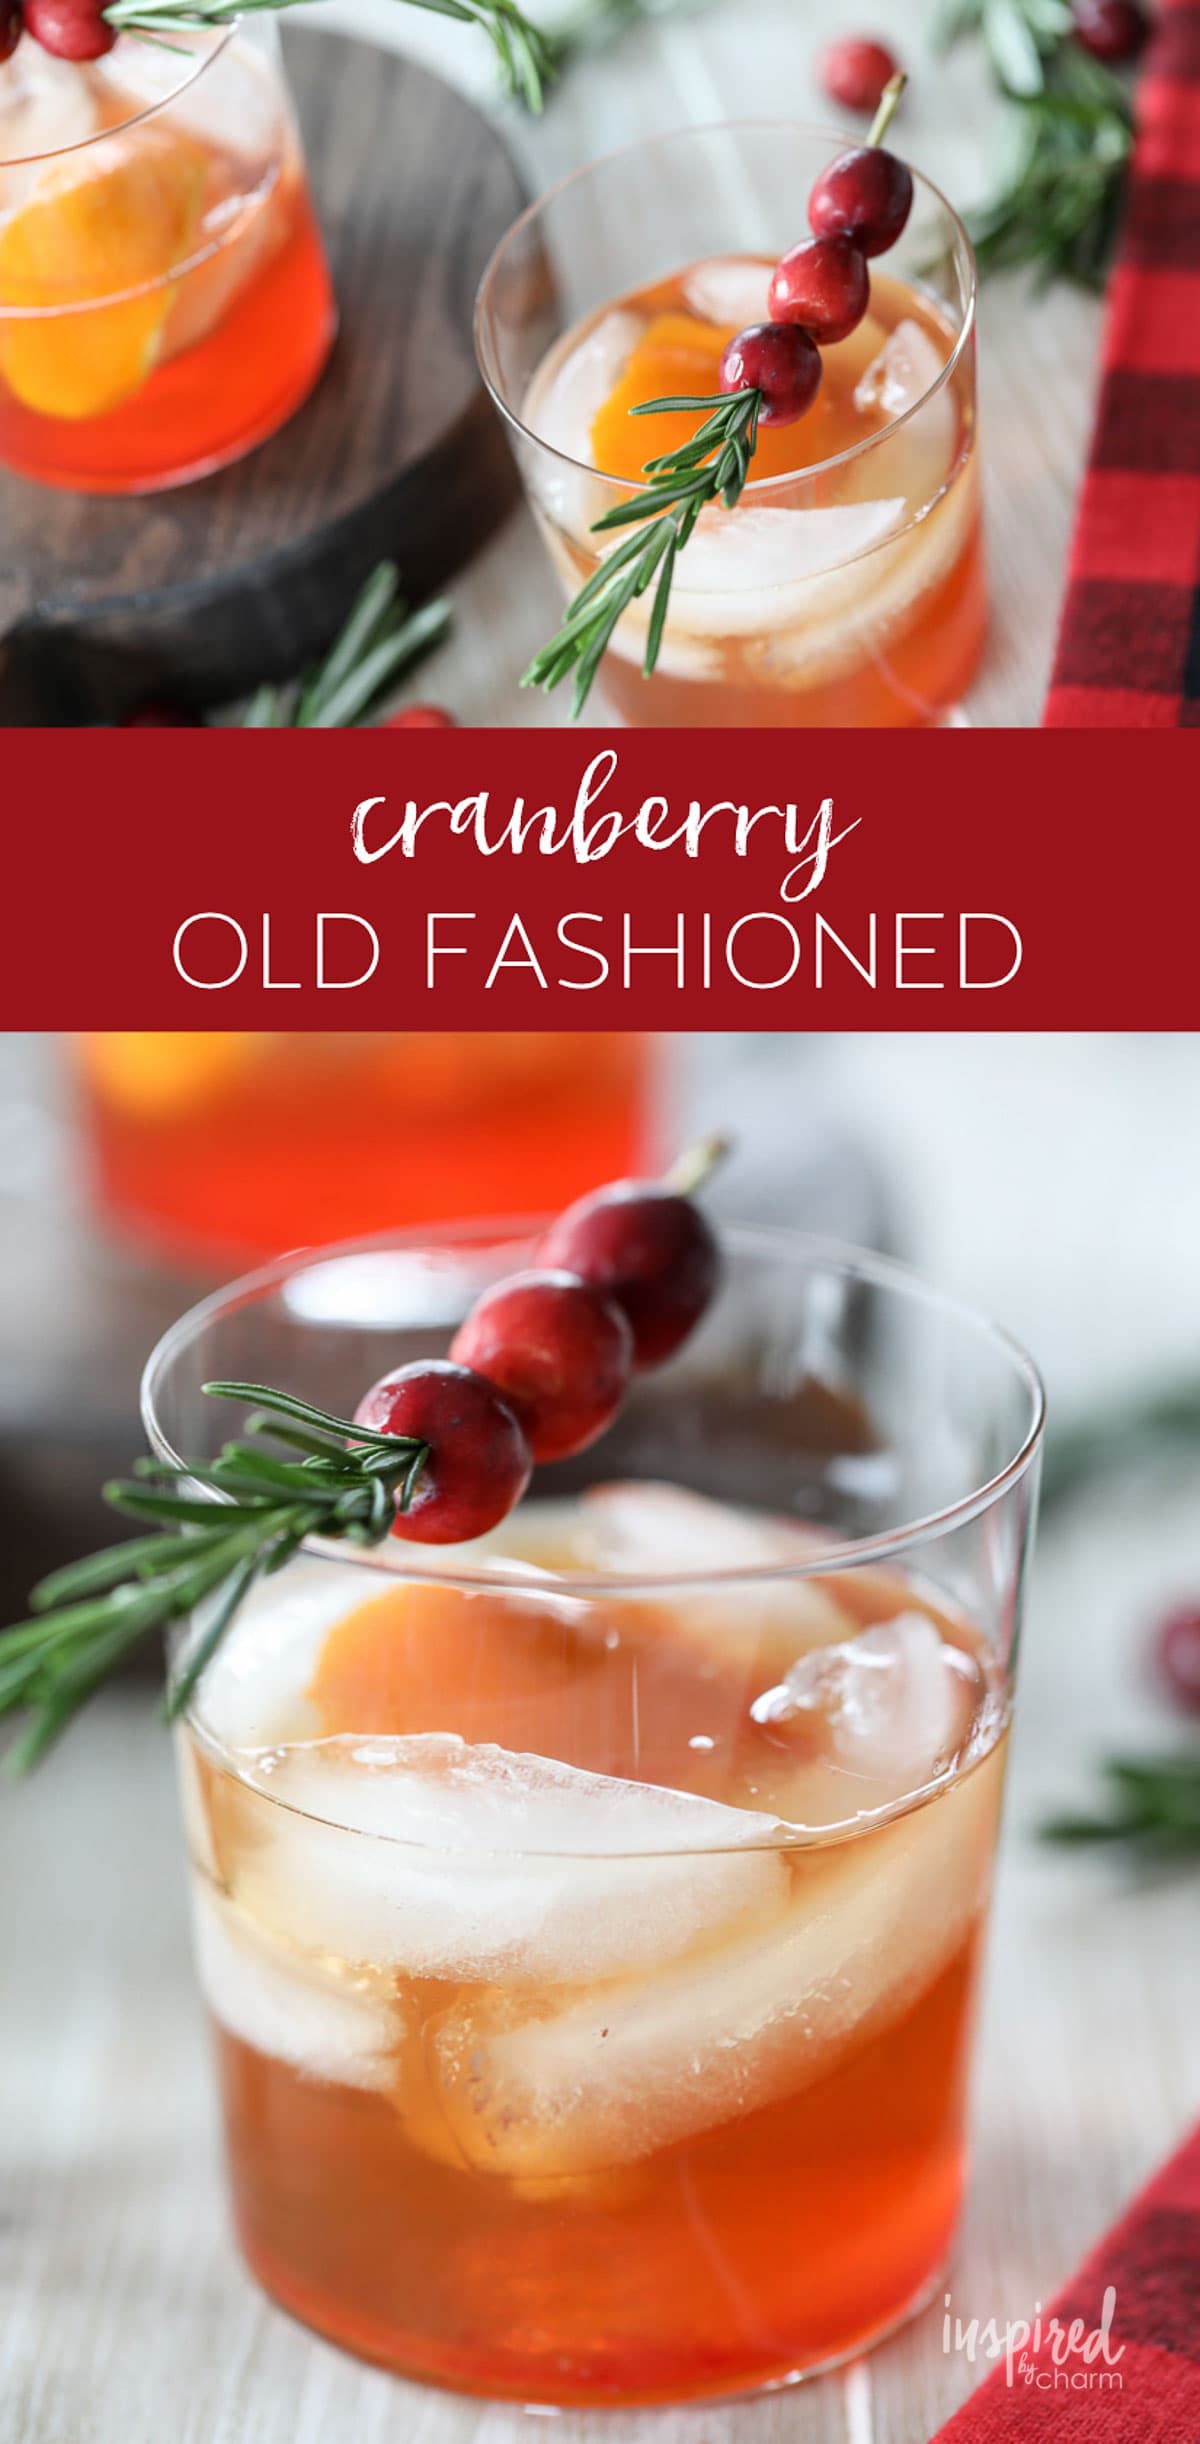 The BEST Cranberry Old Fashioned recipe #christmas #cocktail #cranberry #oldfashioned #recipe #cocktail #bourbon